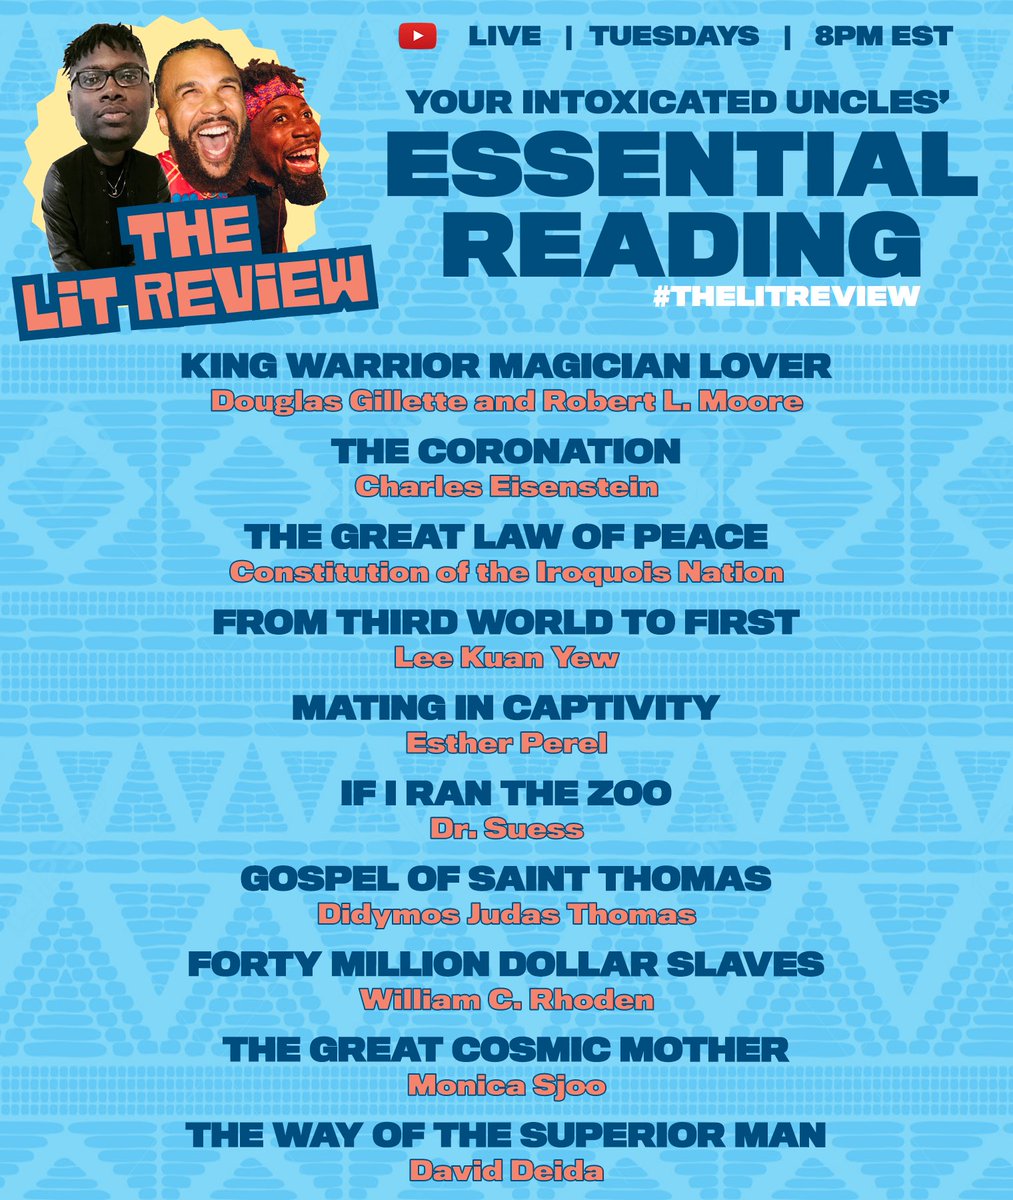 The Lit Review Essential Reading List. #TheLitReview @LitReviewLive